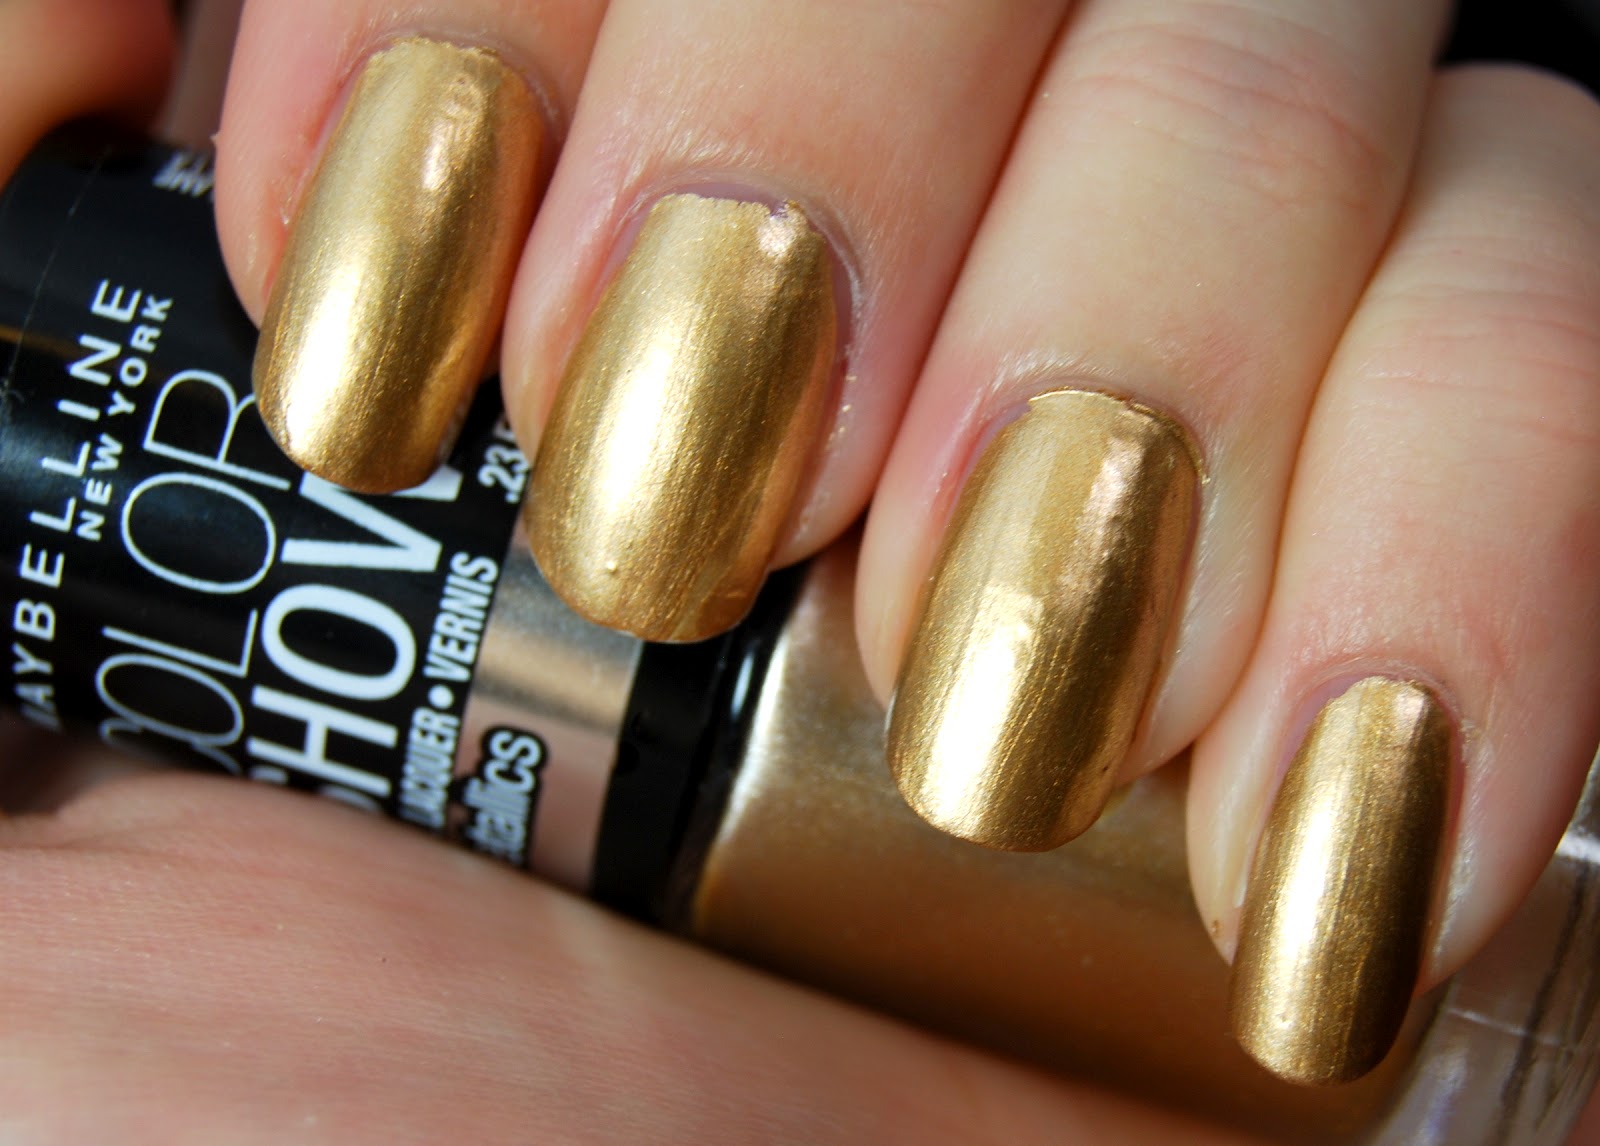 9. Emma Nail Polish in "Golden Glow" - wide 3